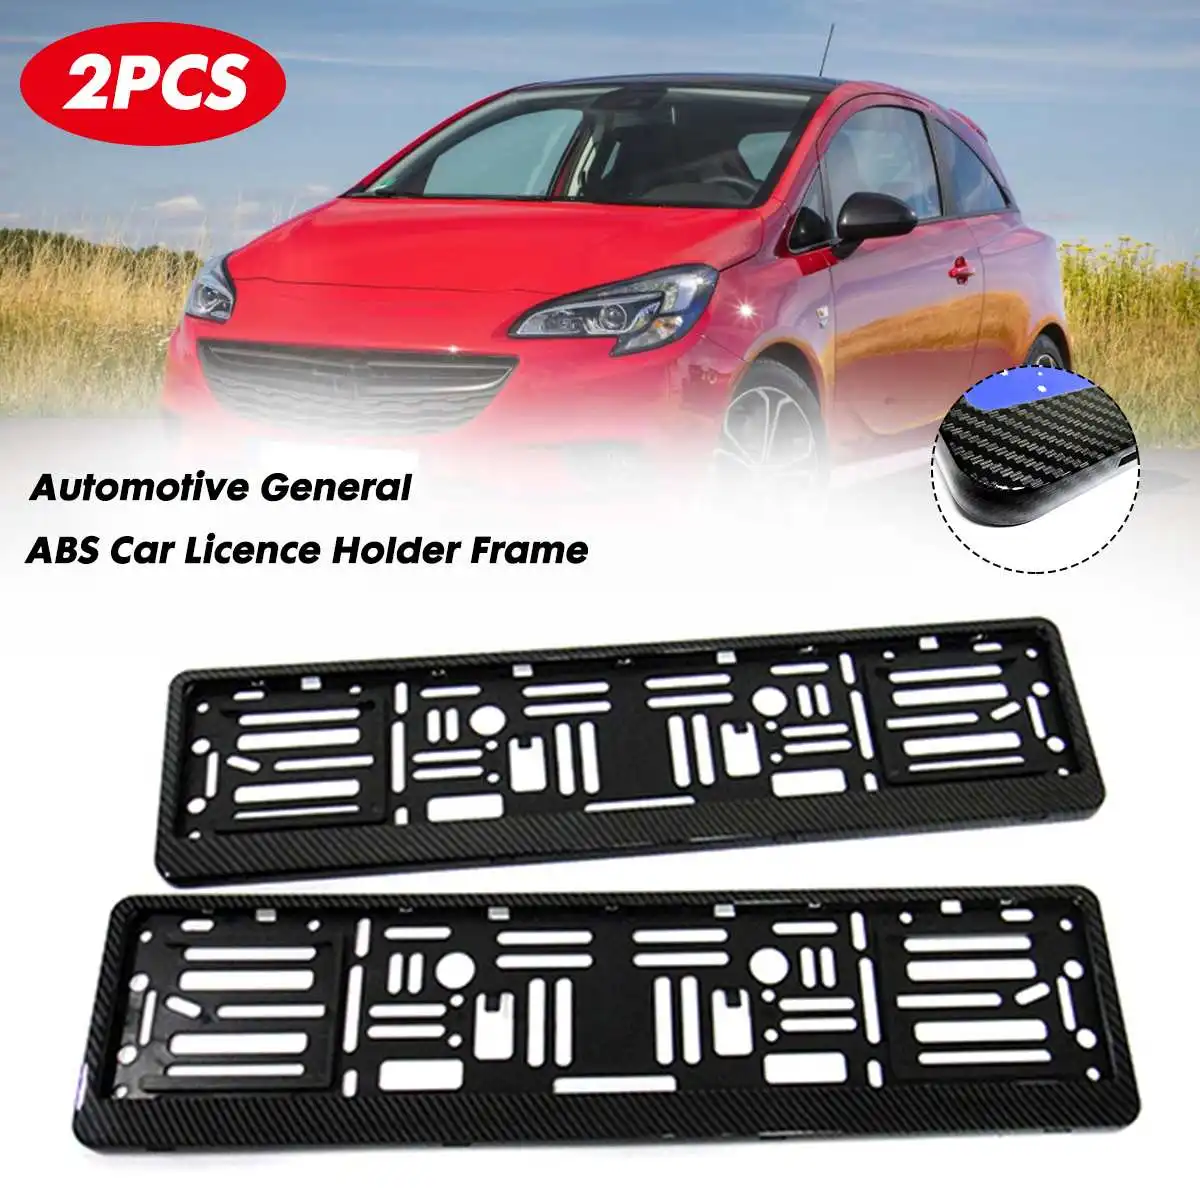 A PAIR DACAR PAINT RED Superb Quality Car Registration License Number Plate UNIVERSAL Surrounds Holders Frames 2x BARGAIN! 